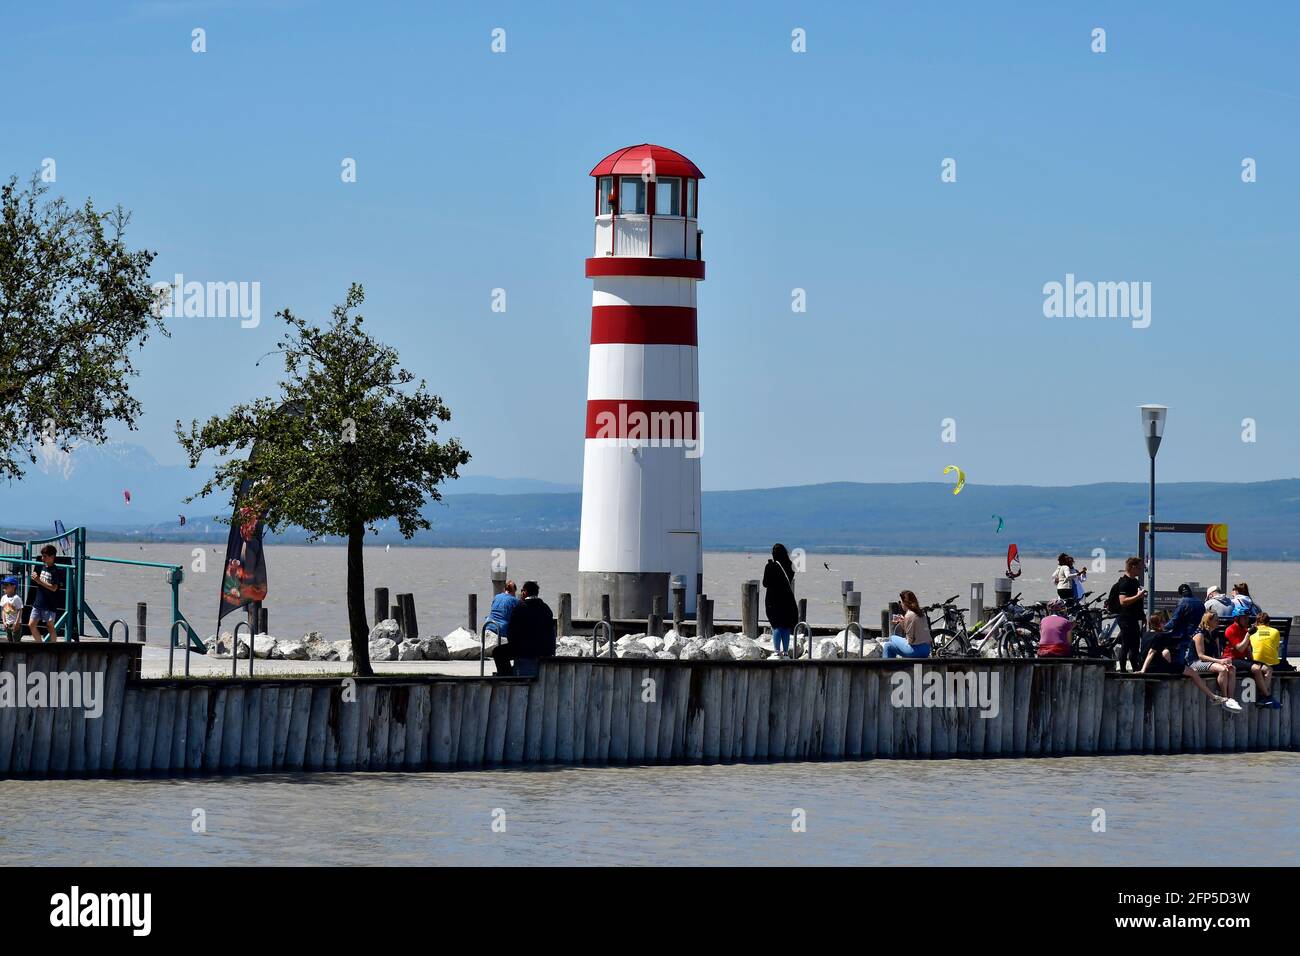 Podersdorf, Austria - May 029, 2021: Unidentified people on jetty with lighthouse in the seaside resort on lake neusiedlersee, a preferred travel dest Stock Photo